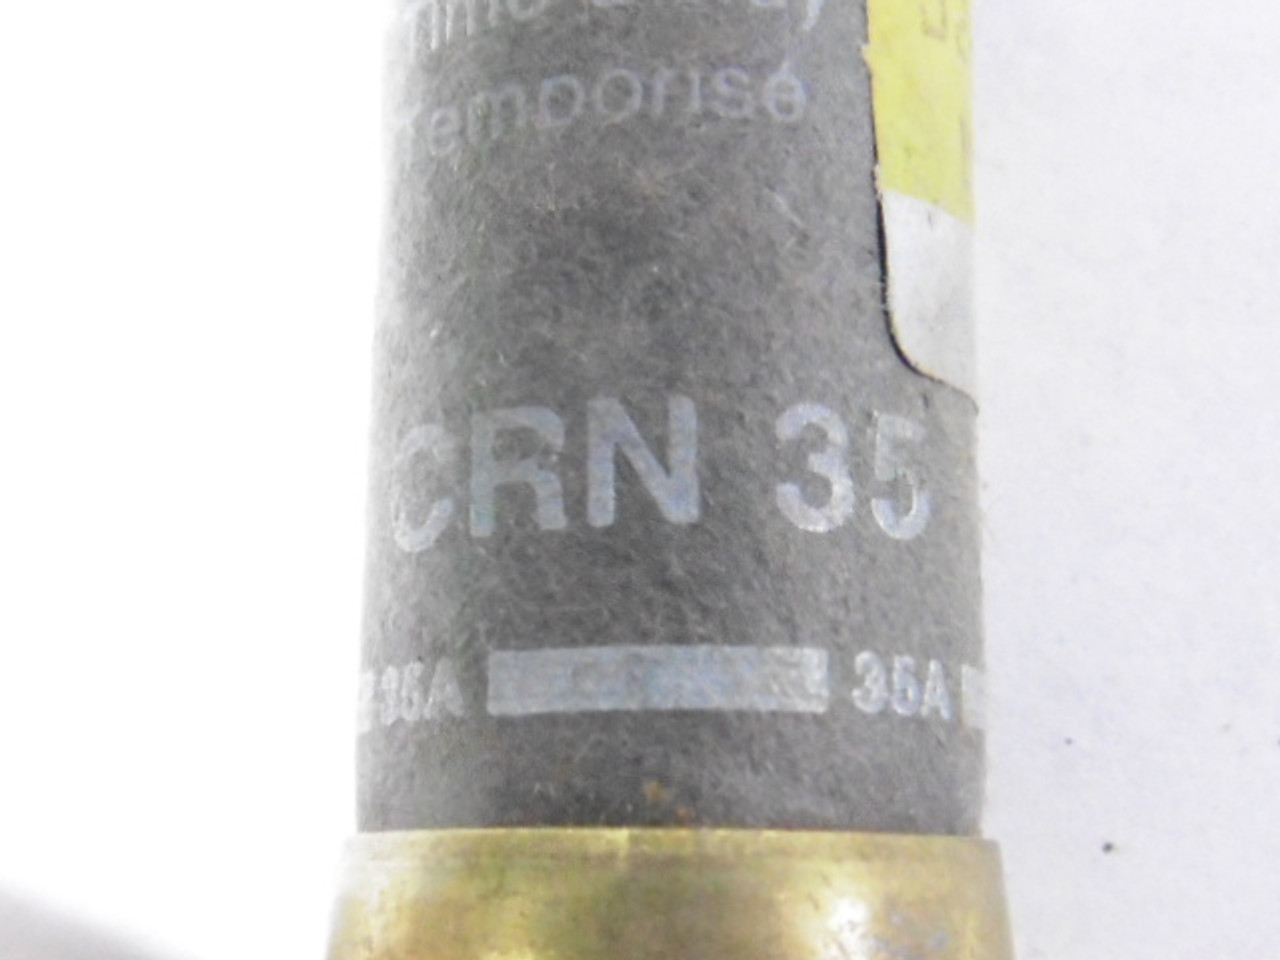 Gould CRN-35 Time Delay Fuse 35A 250V USED